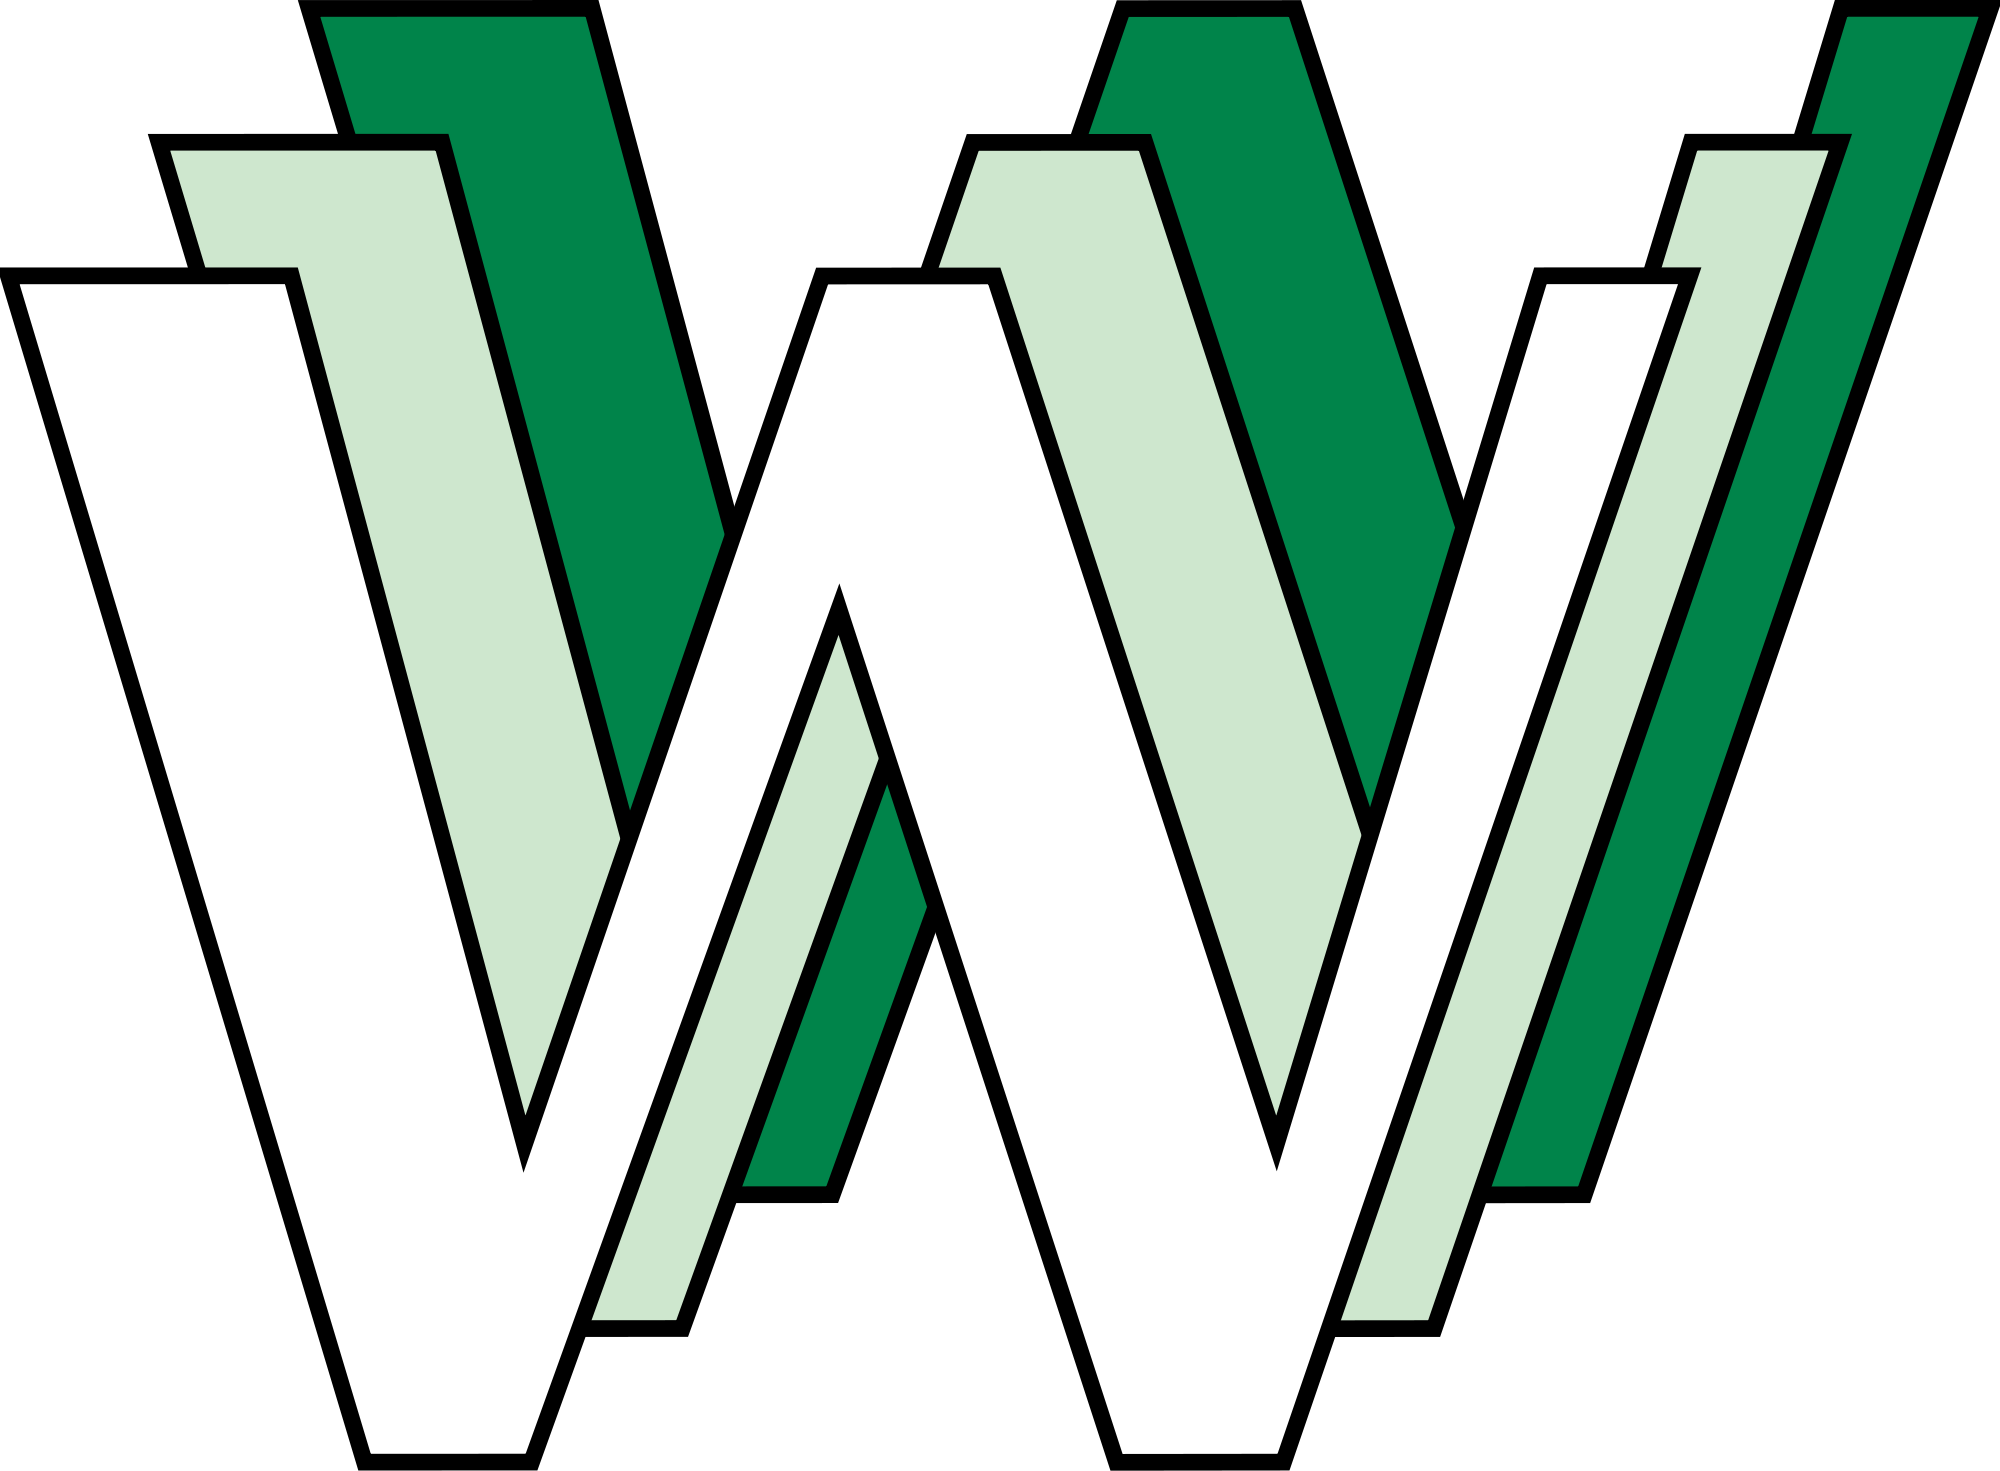 File:WWW logo by Robert Cailliau.svg - Wikimedia Commons